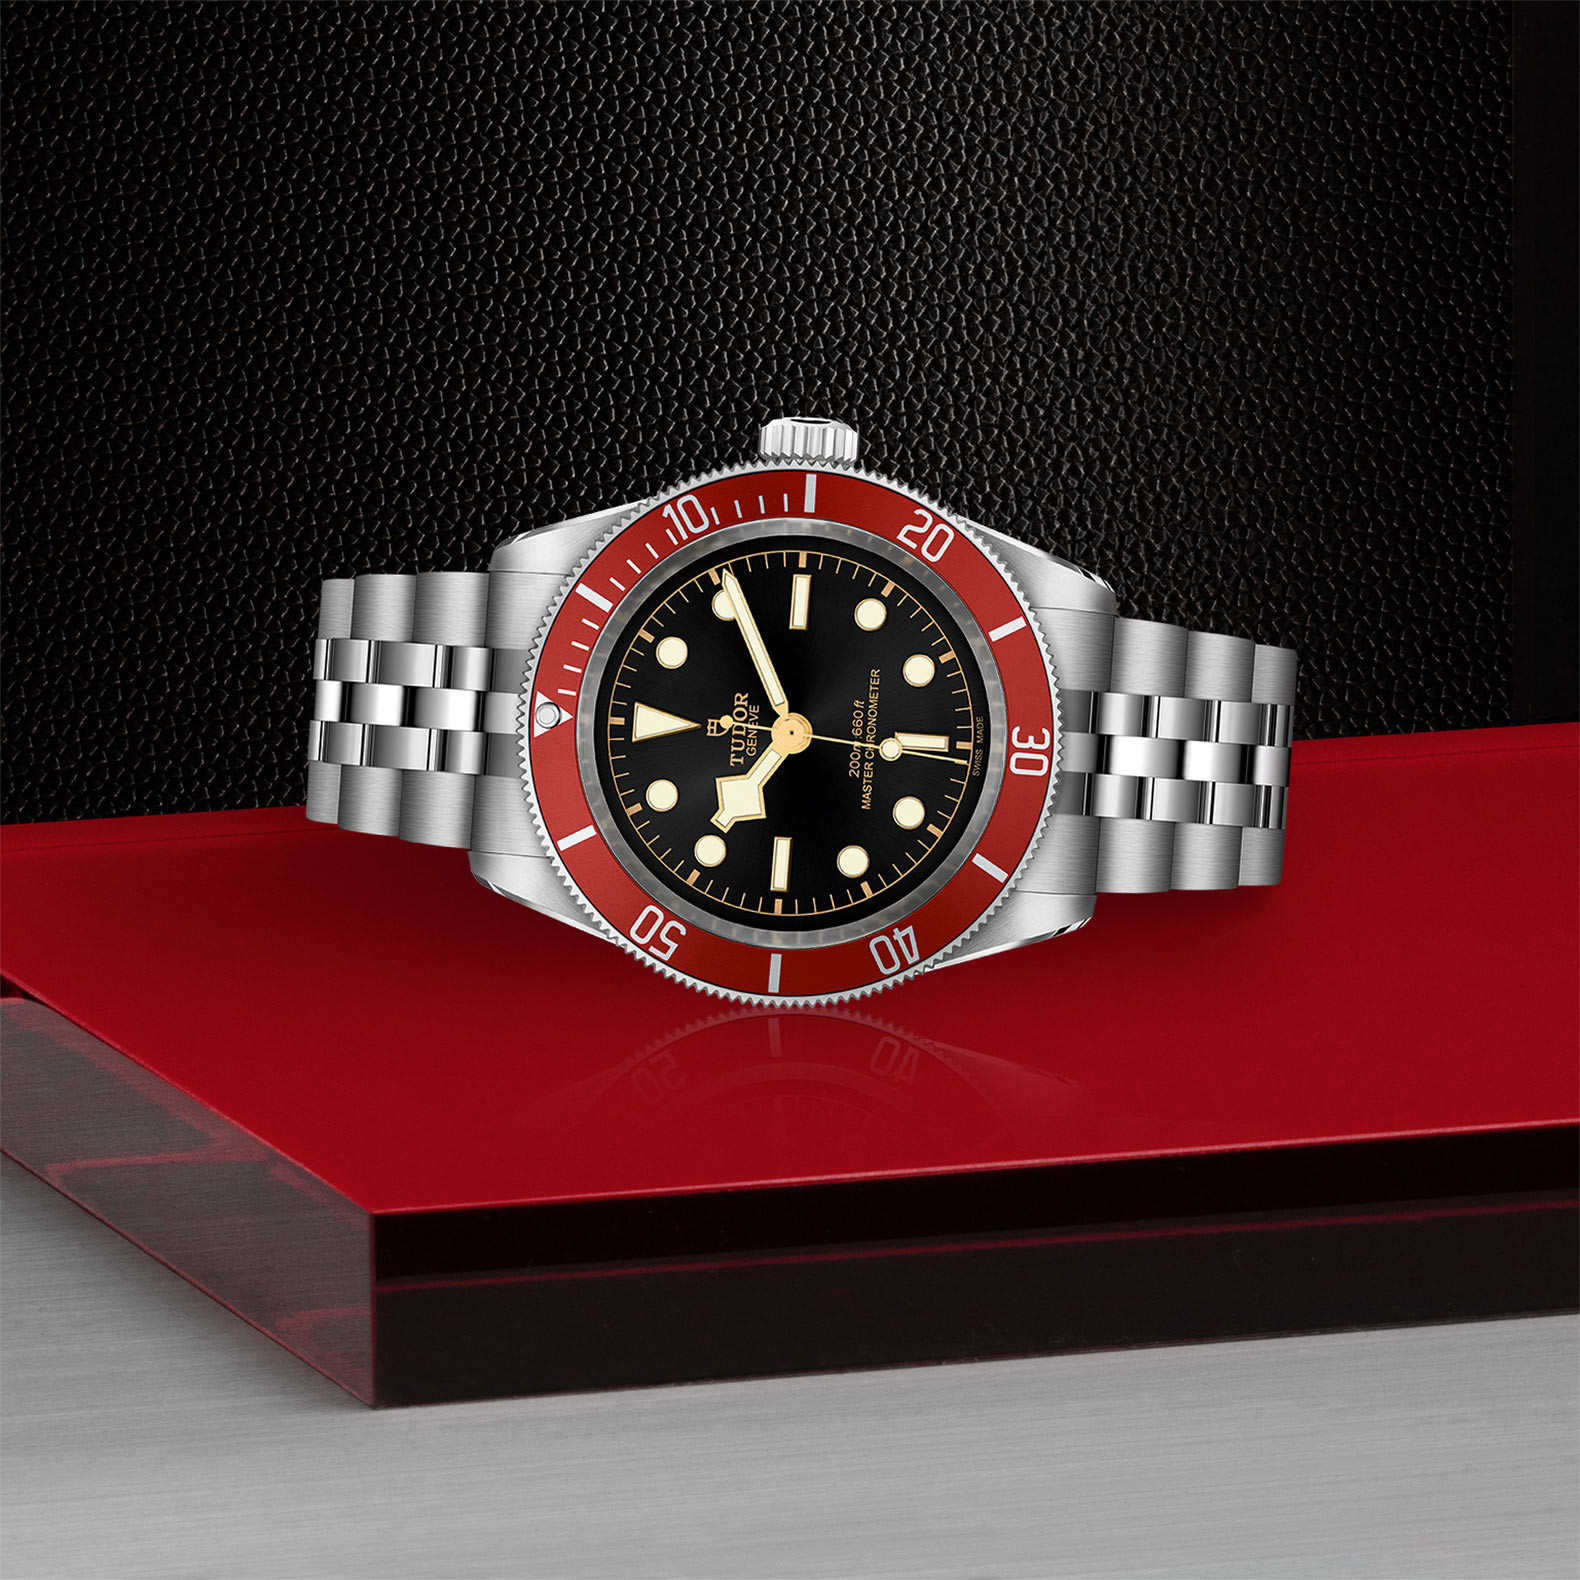 TUDOR Black Bay with 41mm Steel Case and Steel Bracelet M7941A1A0RU-0003 Watch in Store Laying Down